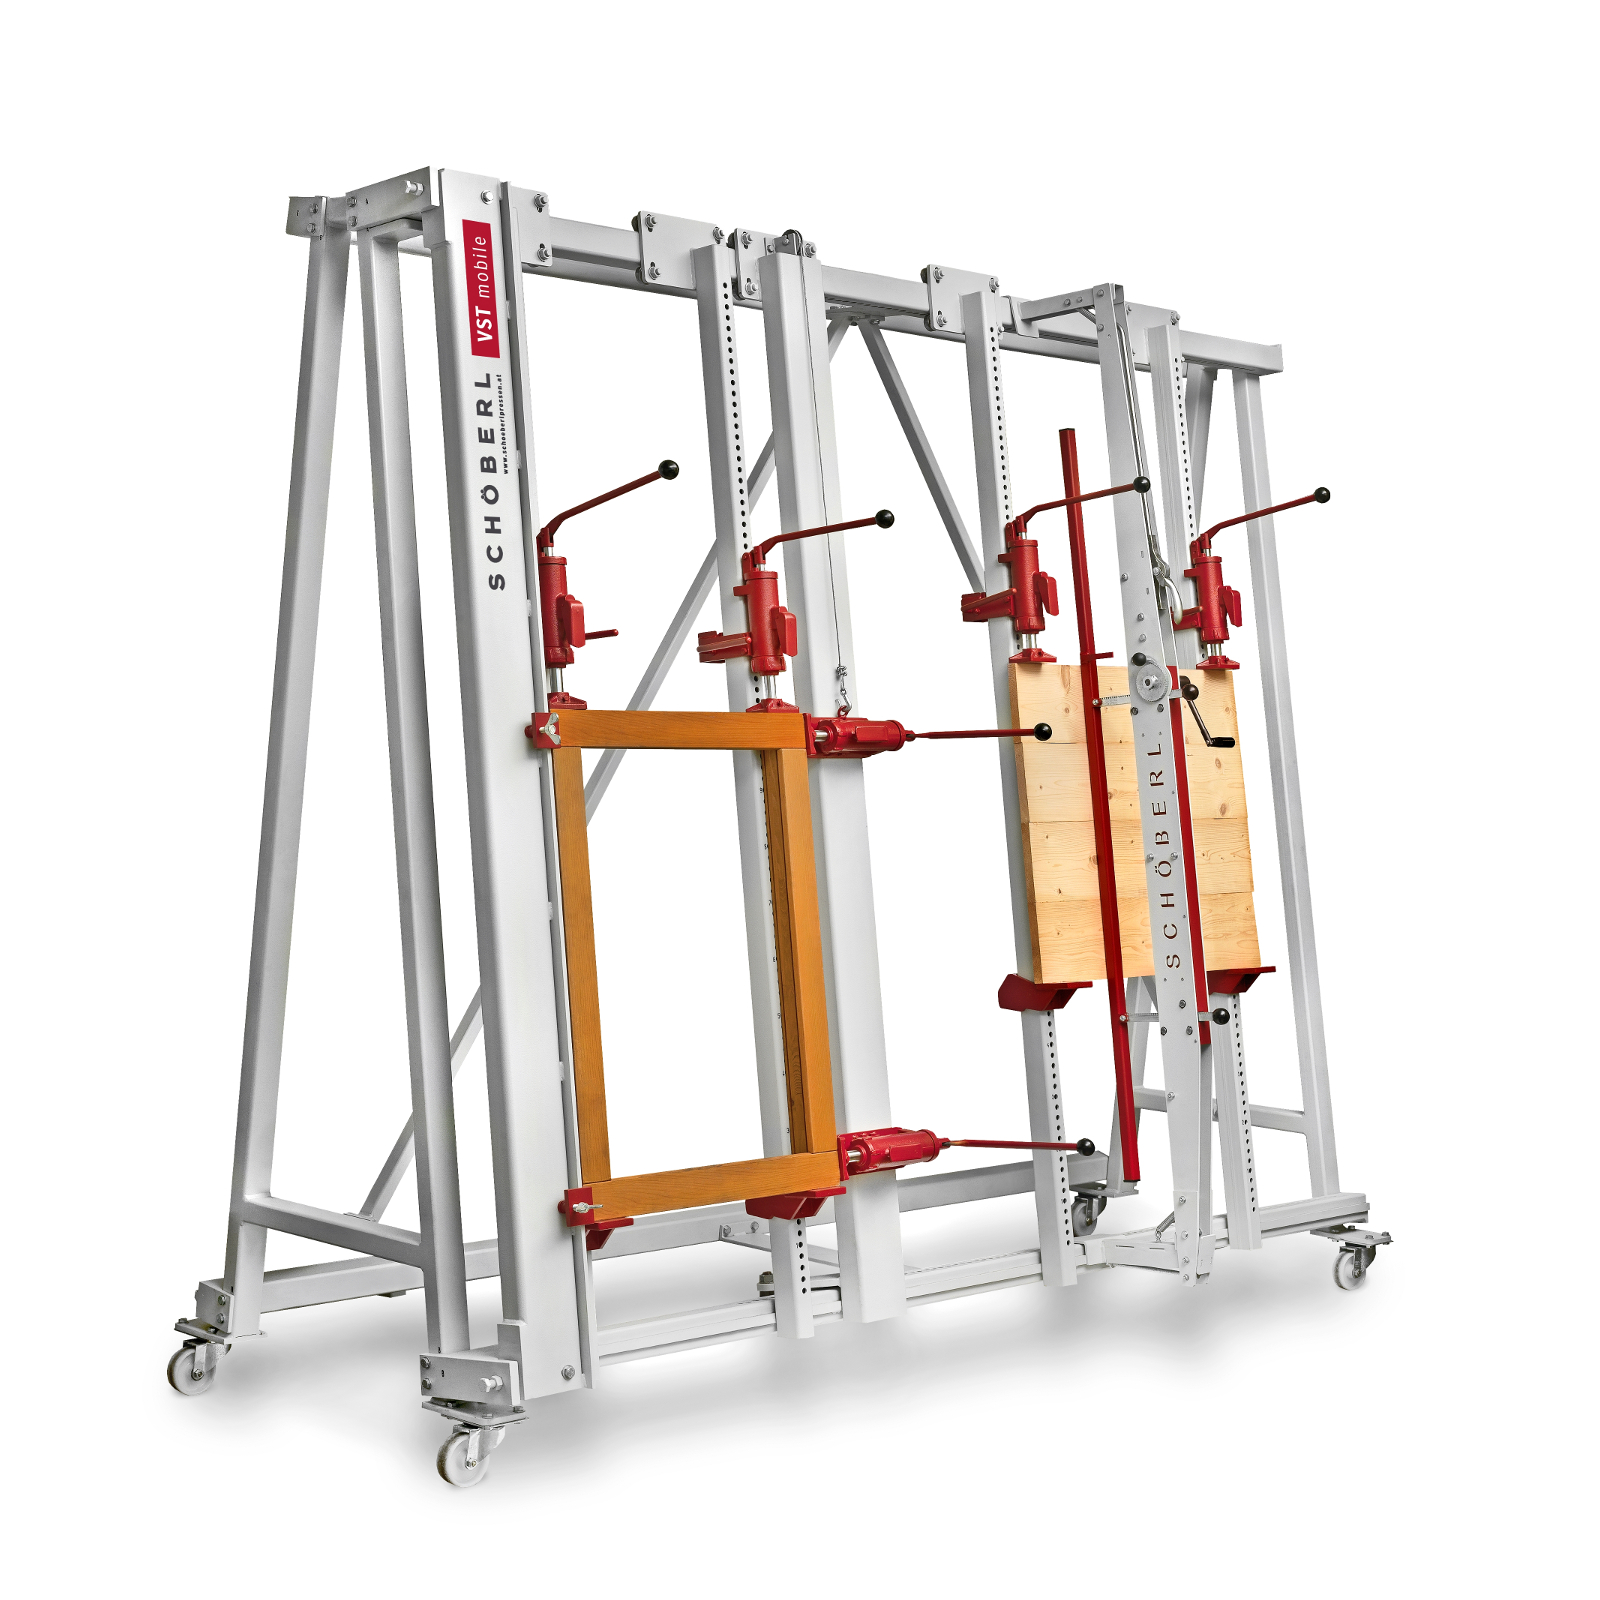 Mobile gluing stand with frame press